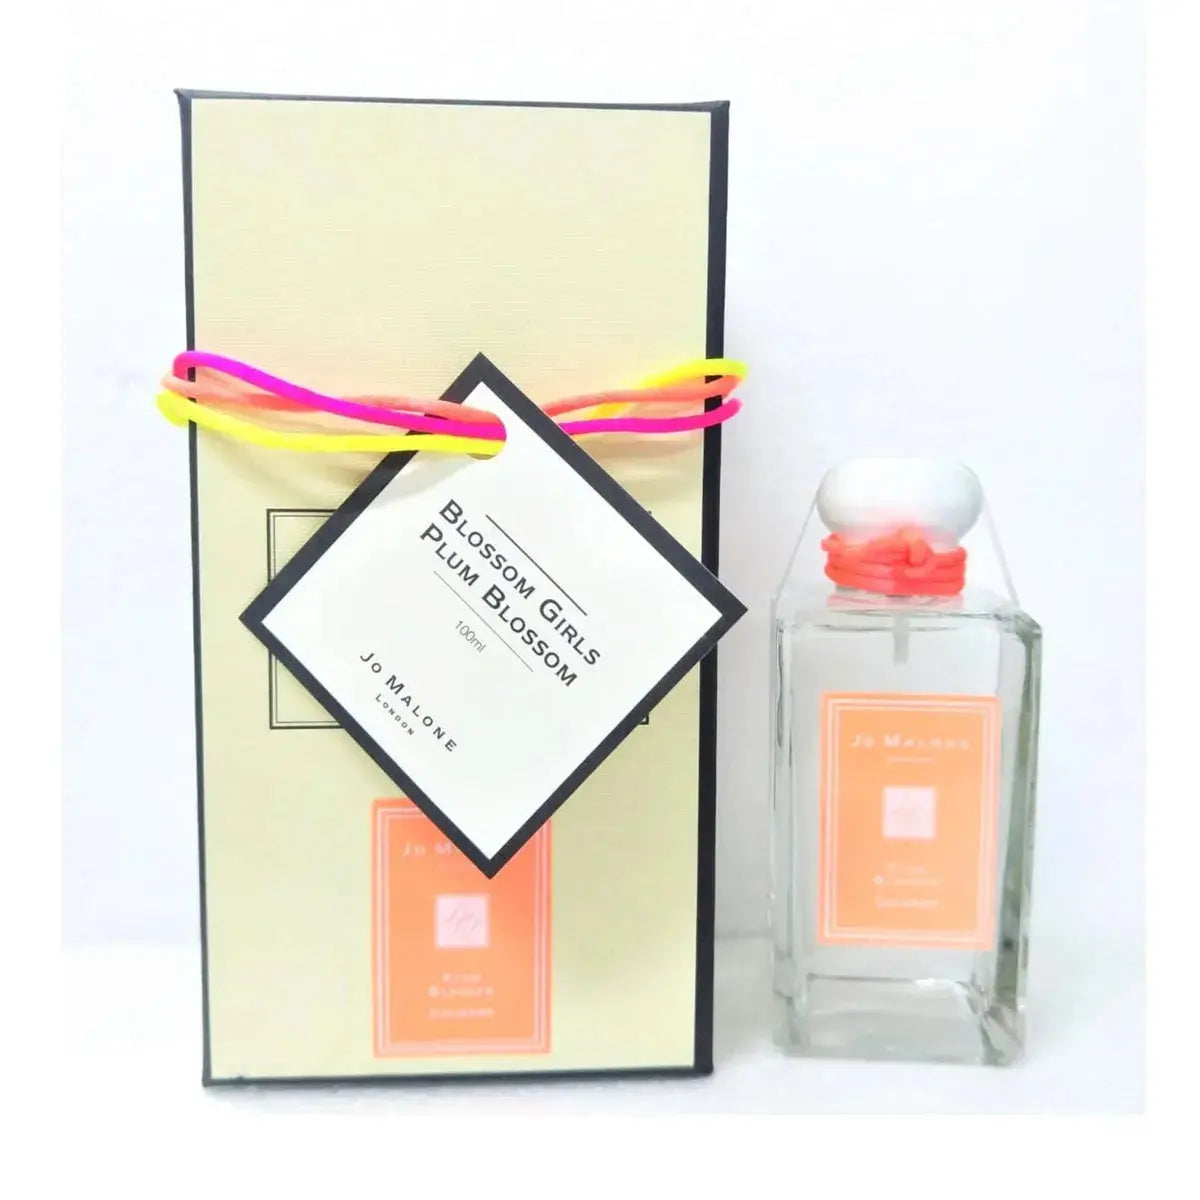 Jo Malone Plum Blossom Girl Limited Edition Cologne 100ml Imported Perfumes & Beauty Store